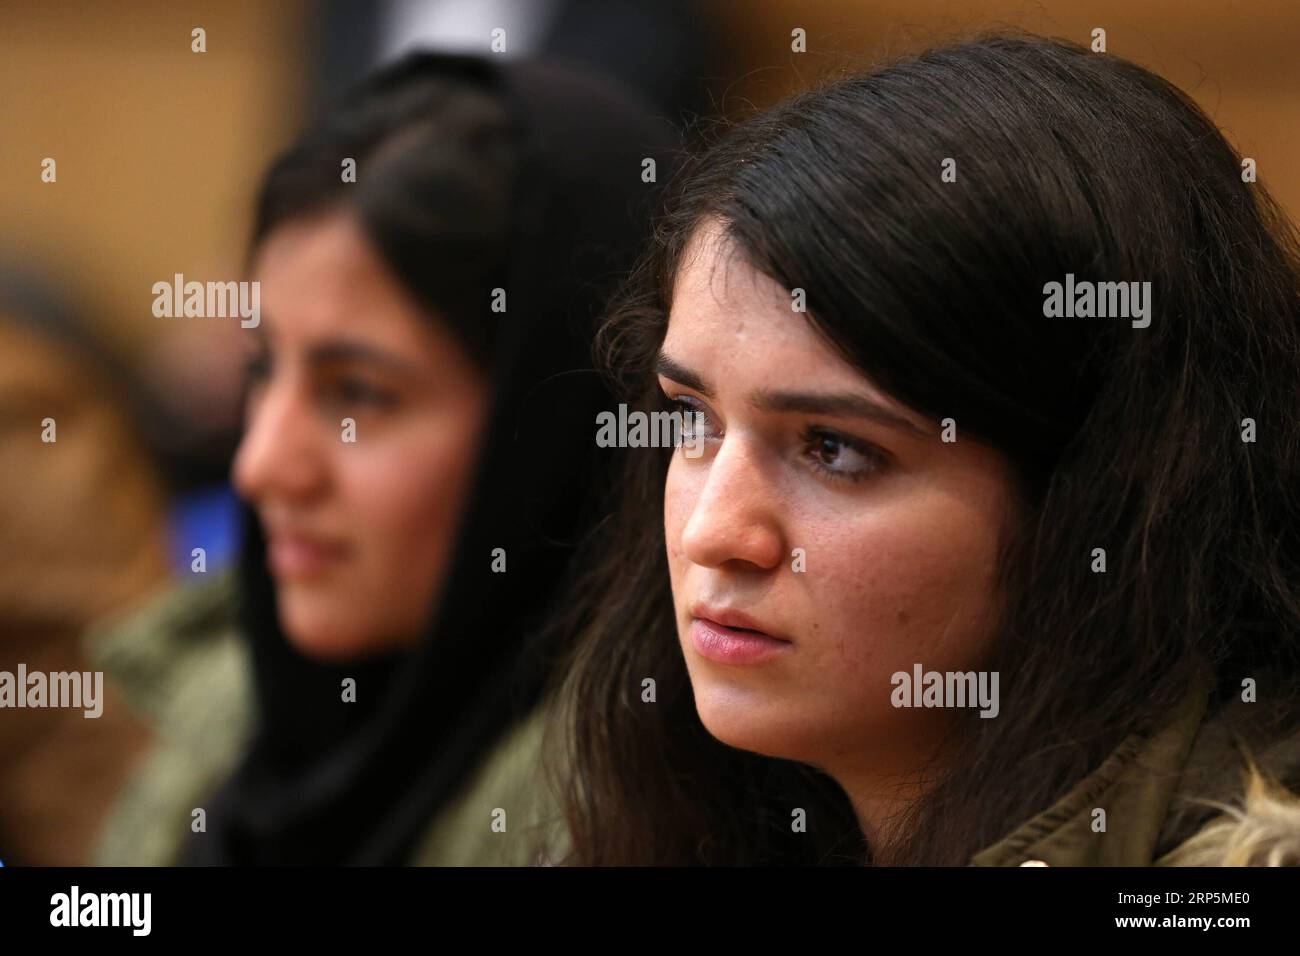 (181219) -- ATHENS, Dec. 19, 2018 -- Migrant students are seen attending the press conference of Greek Minister for Migration Policy Dimitrios Vitsas on the occasion of the International Migrants Day in Athens, Greece, on Dec. 18, 2018. Greek society has sent a clear message of solidarity to people seeking a better life away from their homelands, Greek officials told the press conference on Tuesday on the occasion of International Migrants Day, observed on Dec. 18 each year since 2000. During the eight years of the debt crisis, Greece has been working systematically towards the smooth integrat Stock Photo